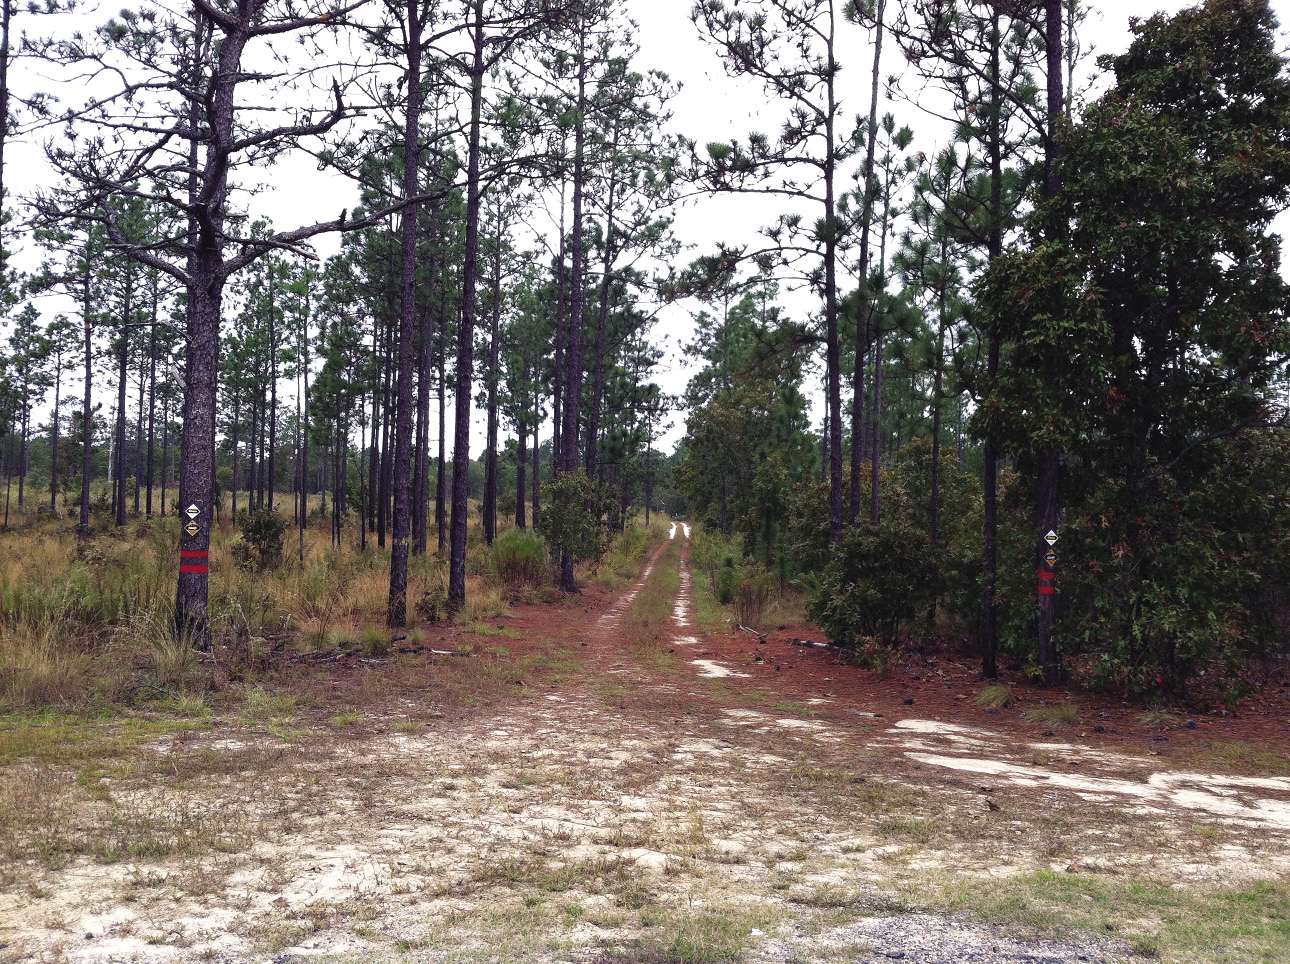 Pine plantation divided by a dirt road. On the left there are few weeds, on the right there are a lot of weeds.